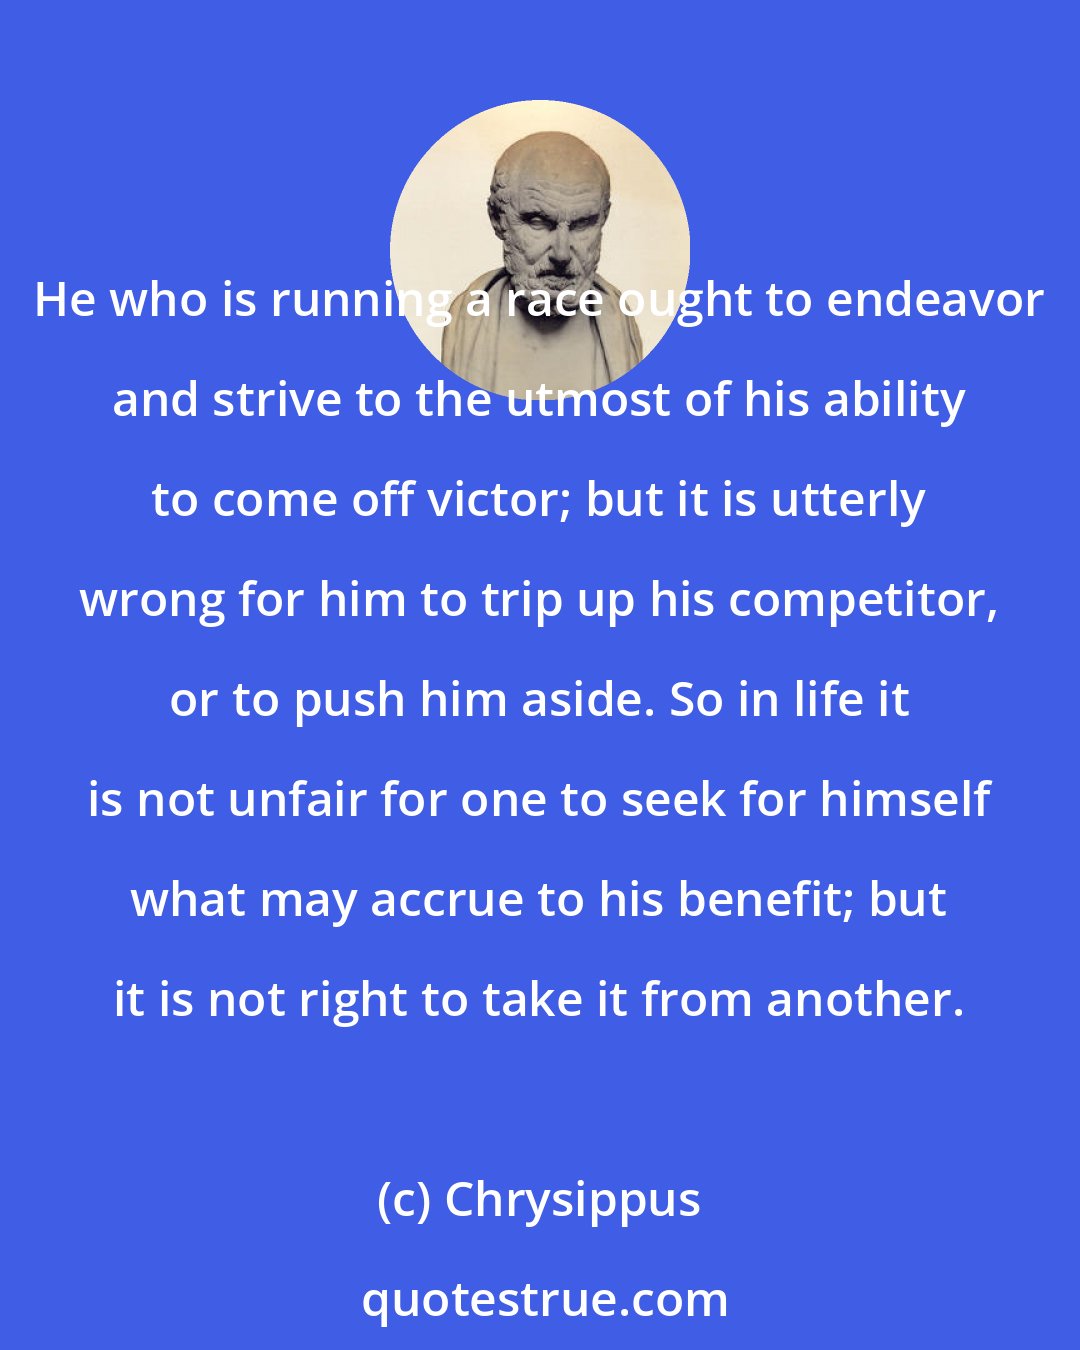 Chrysippus: He who is running a race ought to endeavor and strive to the utmost of his ability to come off victor; but it is utterly wrong for him to trip up his competitor, or to push him aside. So in life it is not unfair for one to seek for himself what may accrue to his benefit; but it is not right to take it from another.